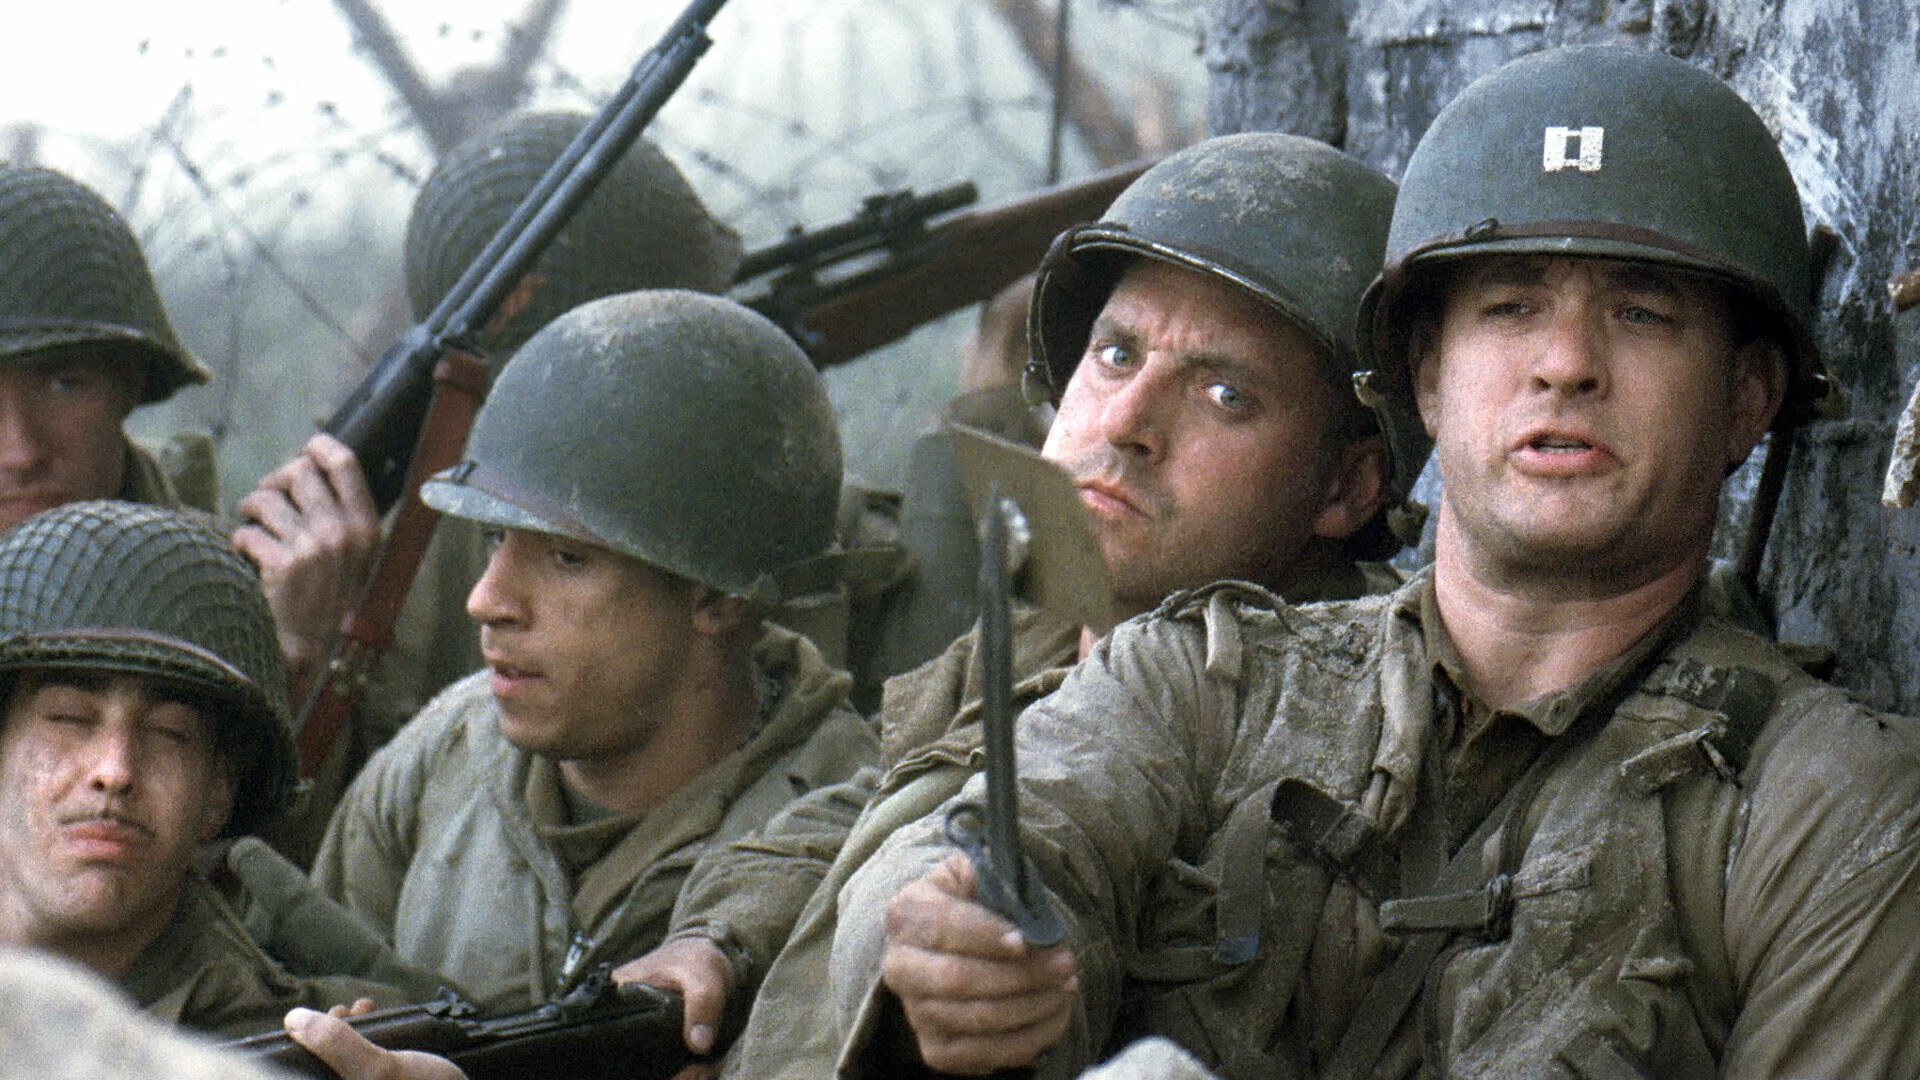 Saving Private Ryan: The last film edited on a non-digital editing system to win an Academy Award for editing. 1920x1080 Full HD Wallpaper.